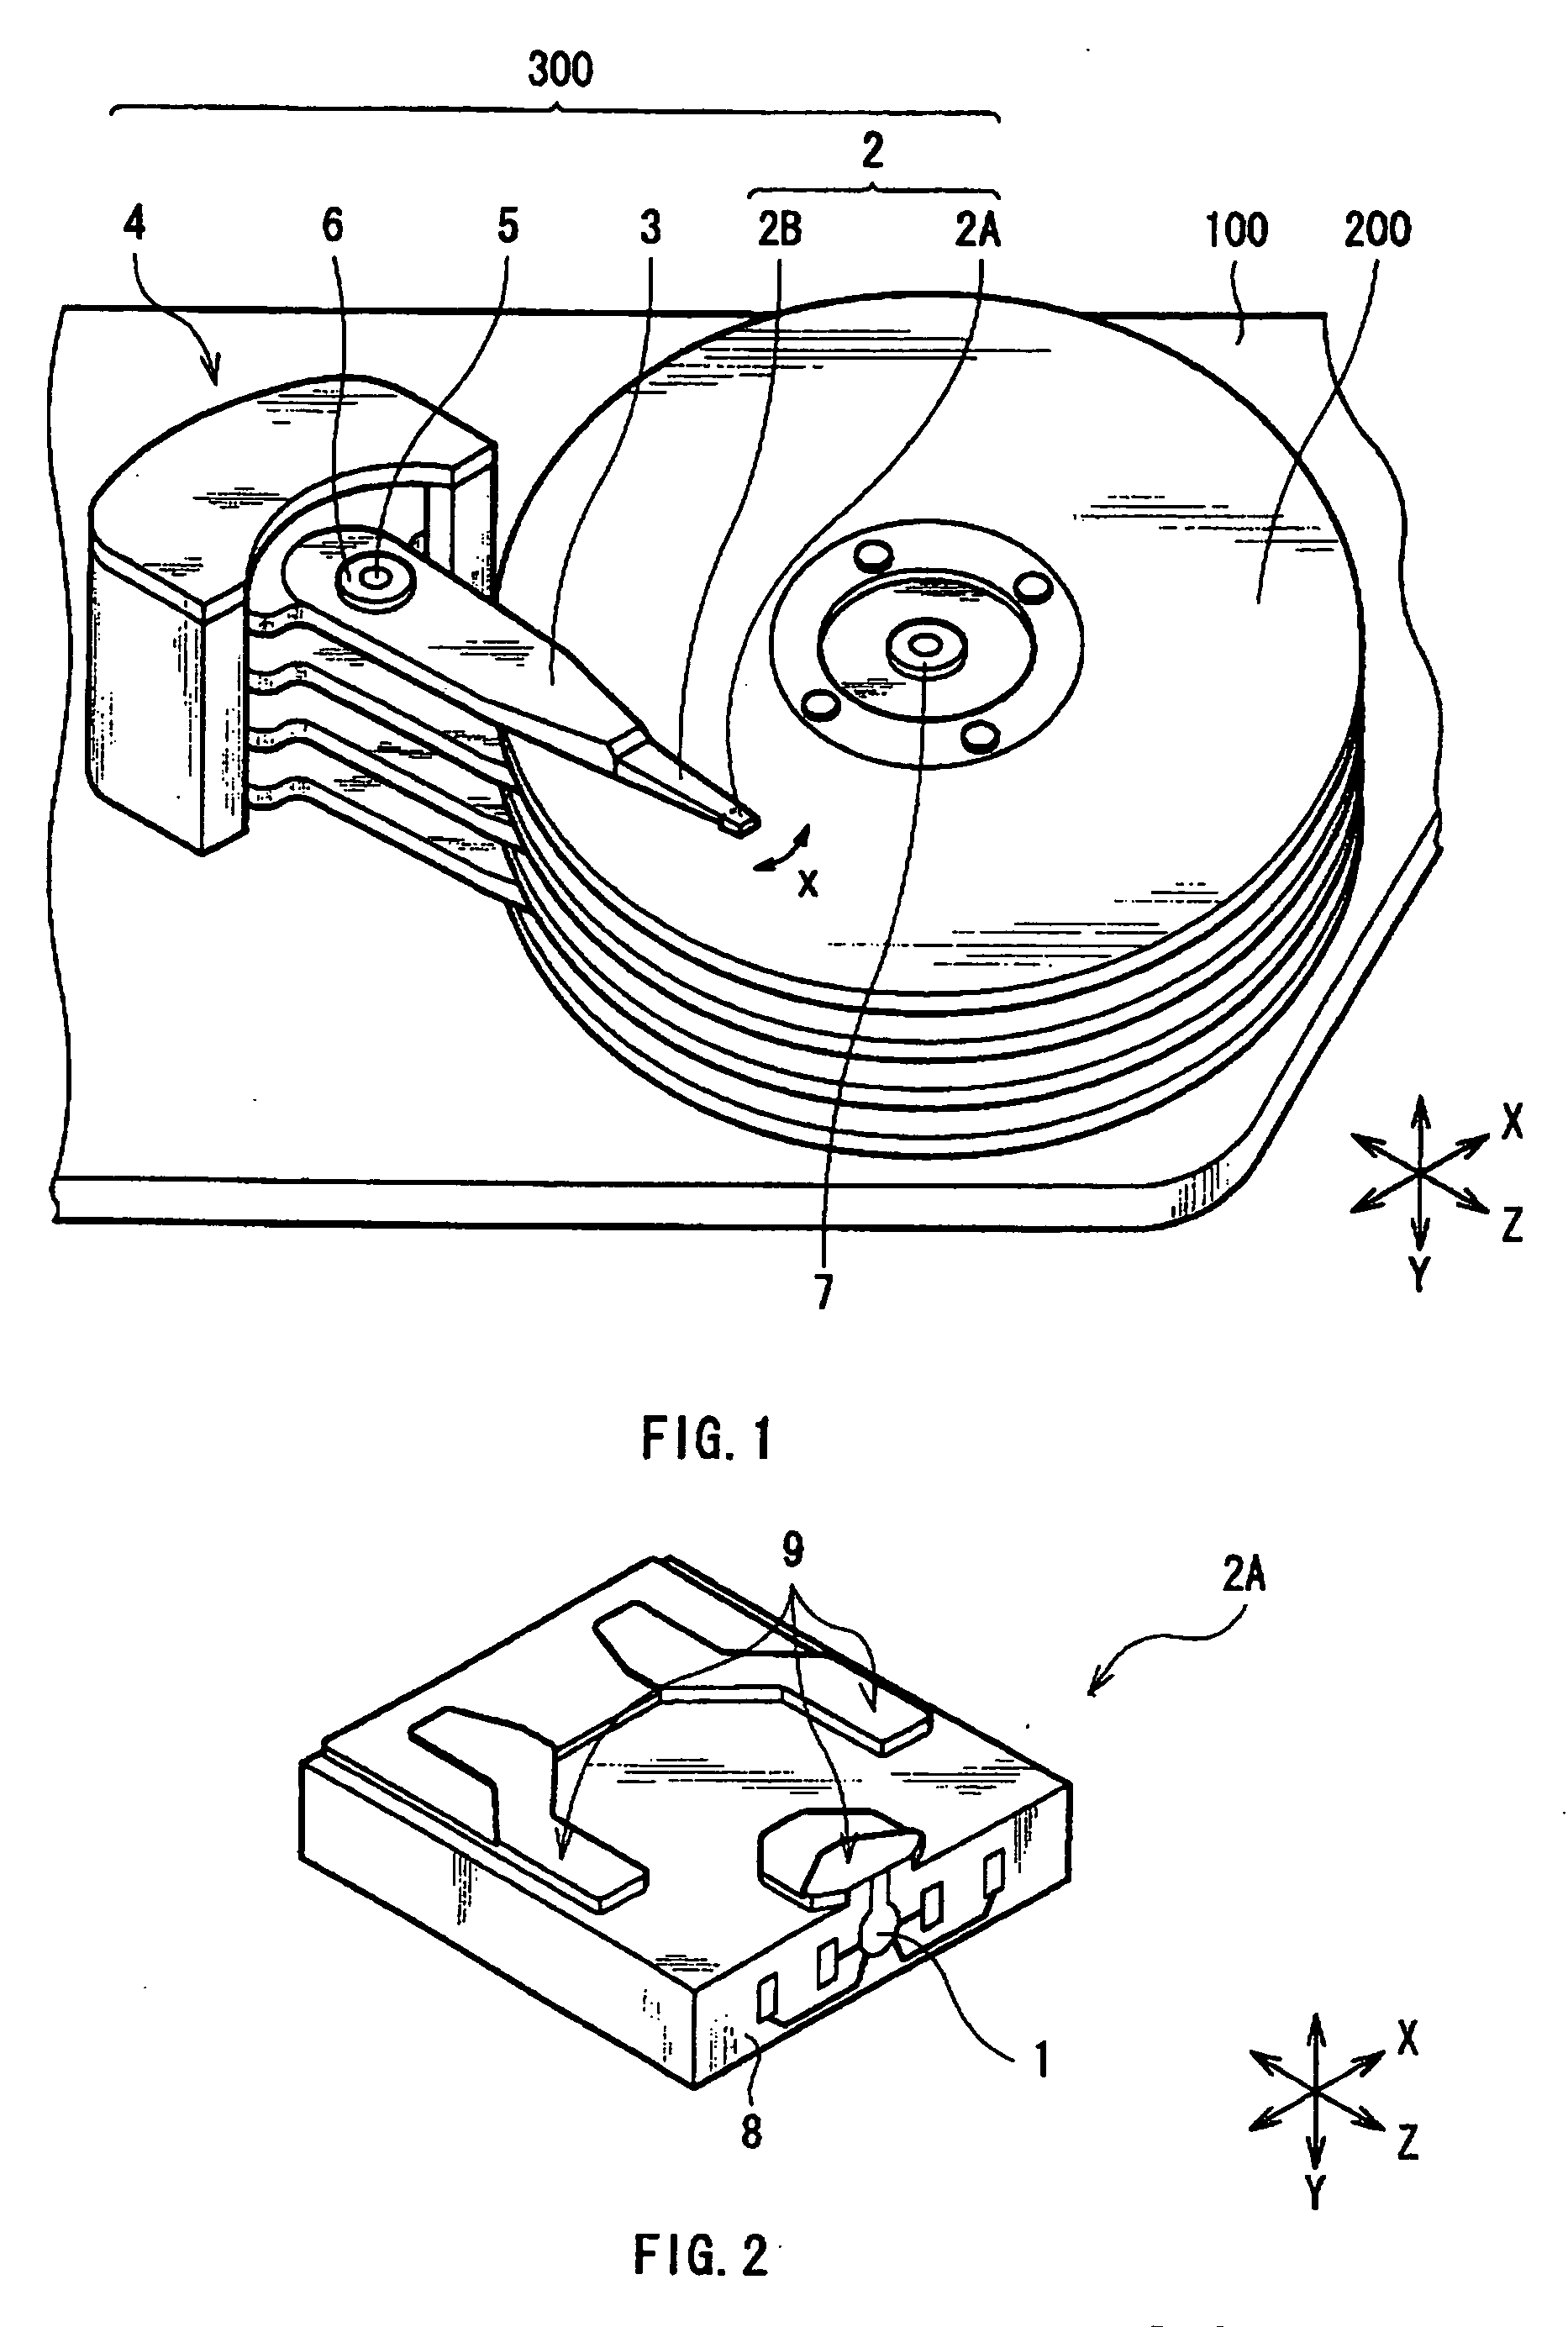 Magnetoresistive device, thin film magnetic head, head gimbals assembly, head arm assembly, magnetic disk apparatus, synthetic antiferromagnetic magnetization pinned layer, magnetic memory cell, and current sensor